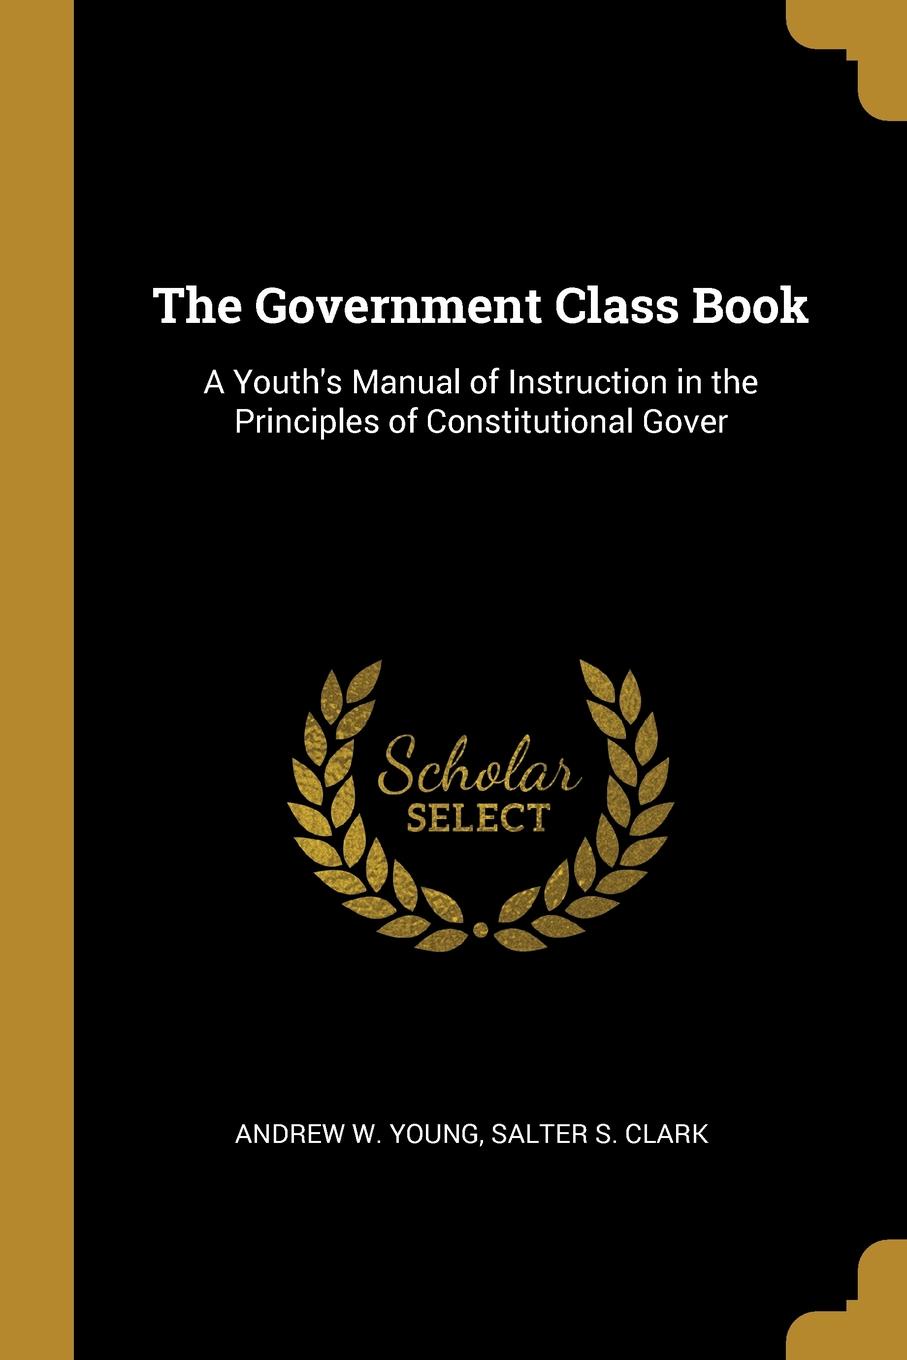 The Government Class Book. A Youth.s Manual of Instruction in the Principles of Constitutional Gover